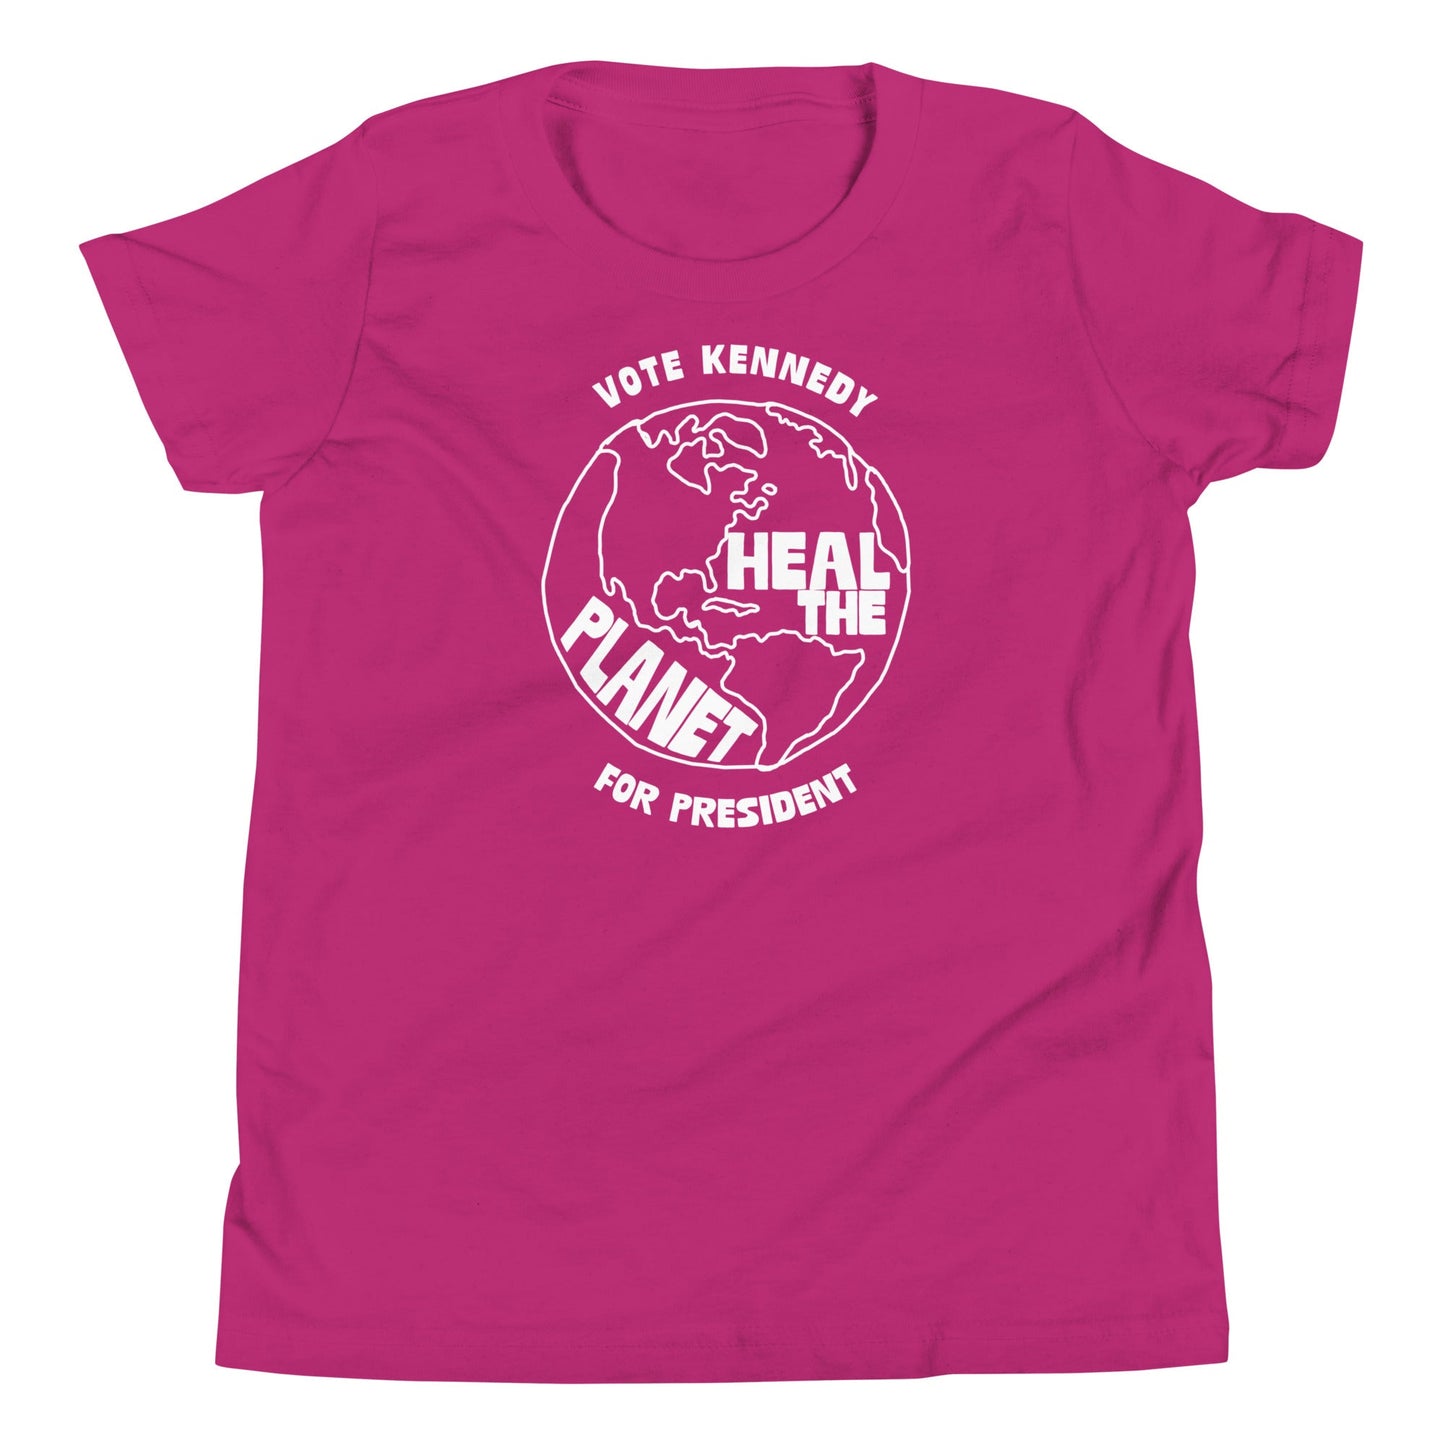 Heal the Planet Youth Tee - TEAM KENNEDY. All rights reserved